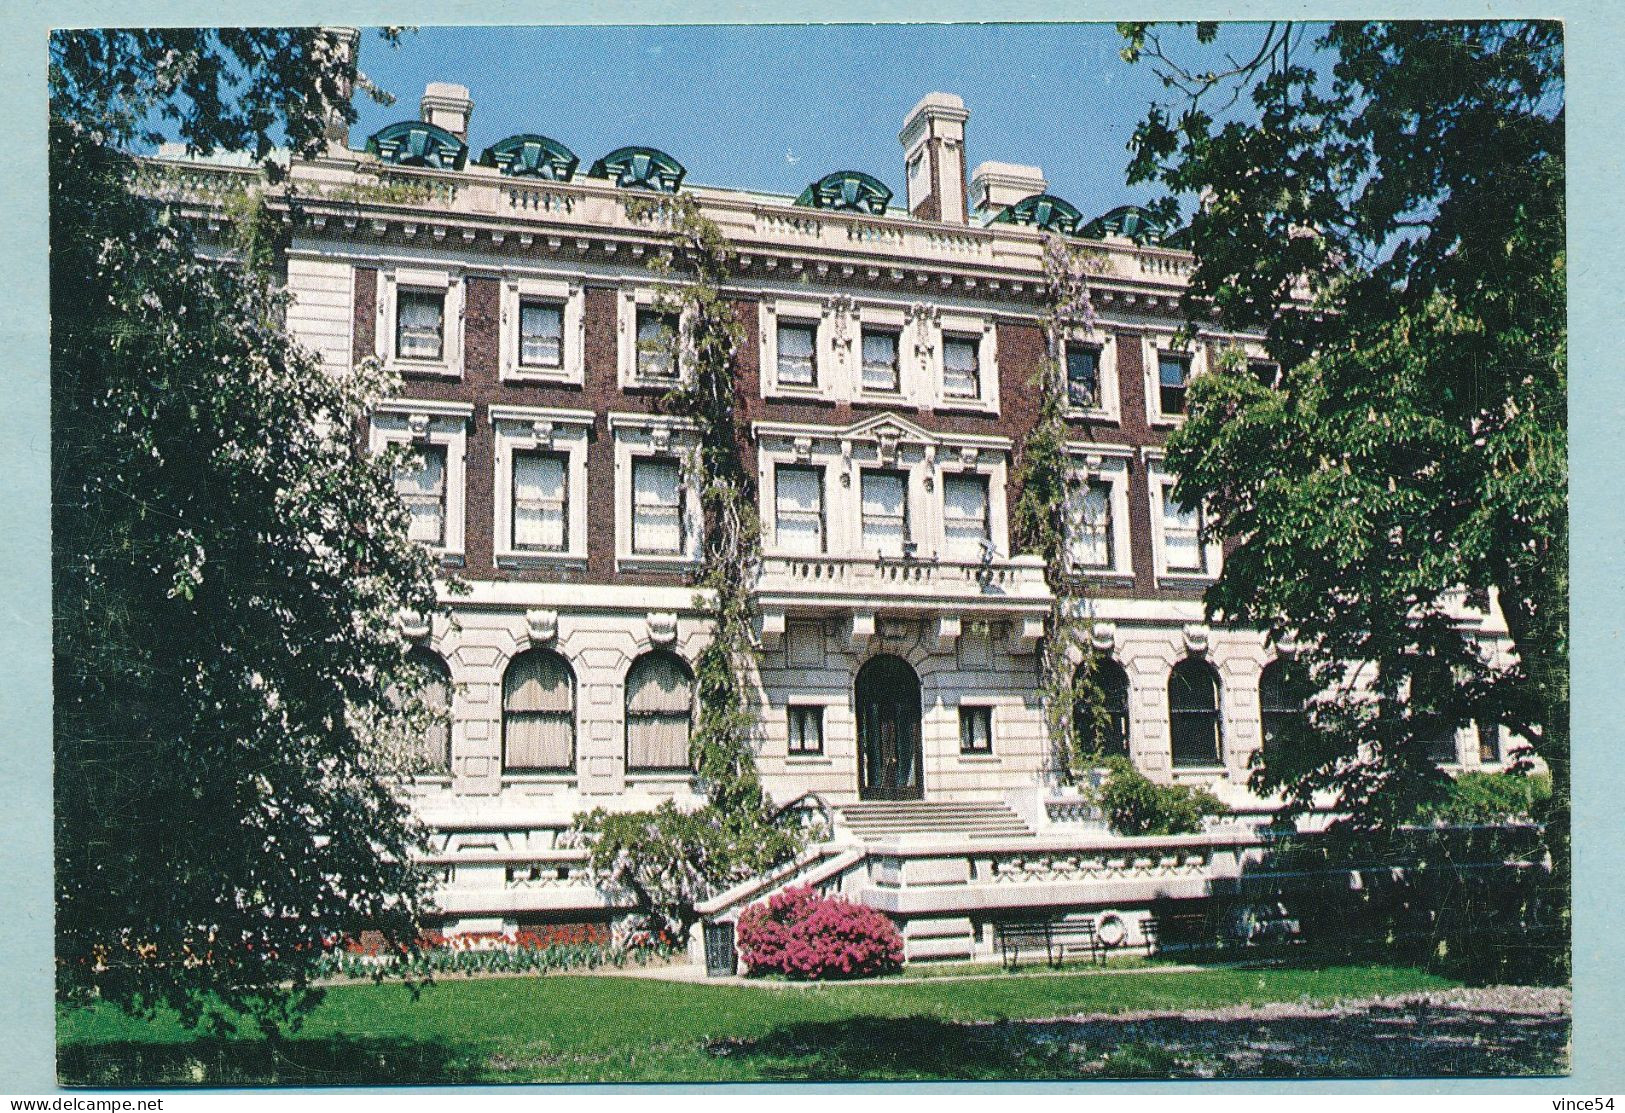 South Façade Carnegie Mansion Home Of The Cooper-Hewitt Museum - Andere Monumente & Gebäude